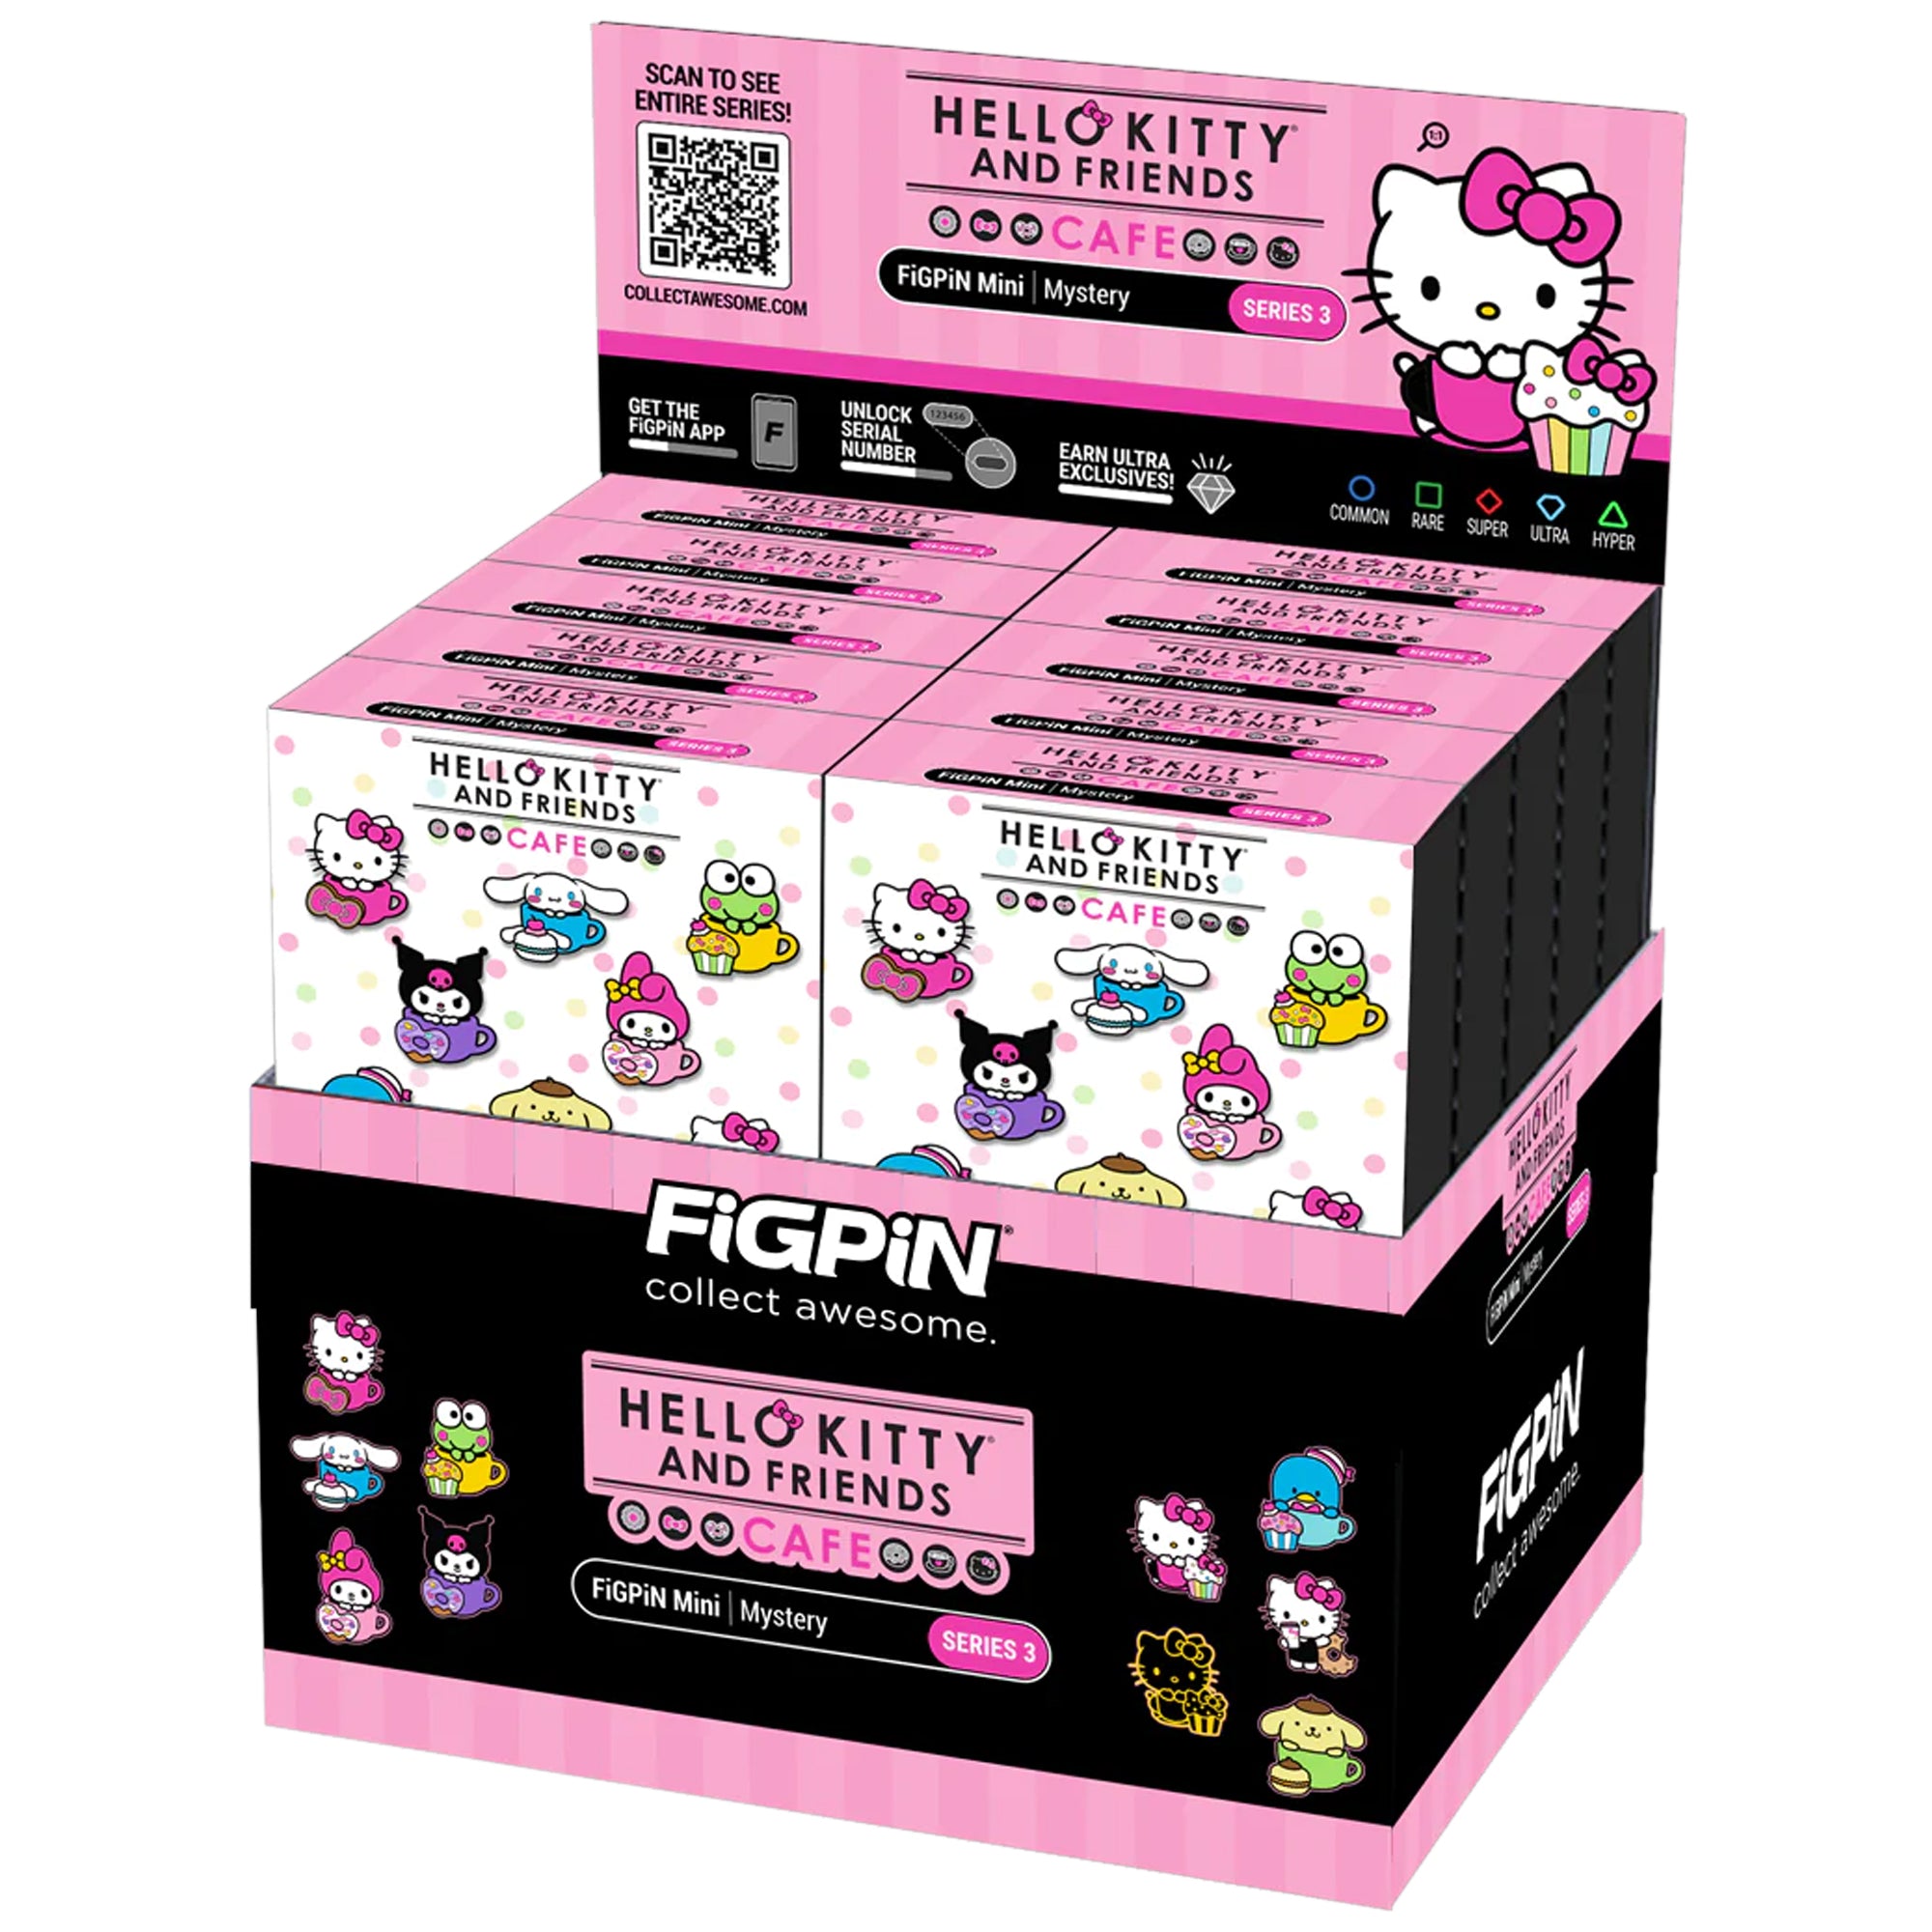 Sanrio Cafe Series 3 Mystery FiGPiN Mini Blind Surprise! NEW RELEASE